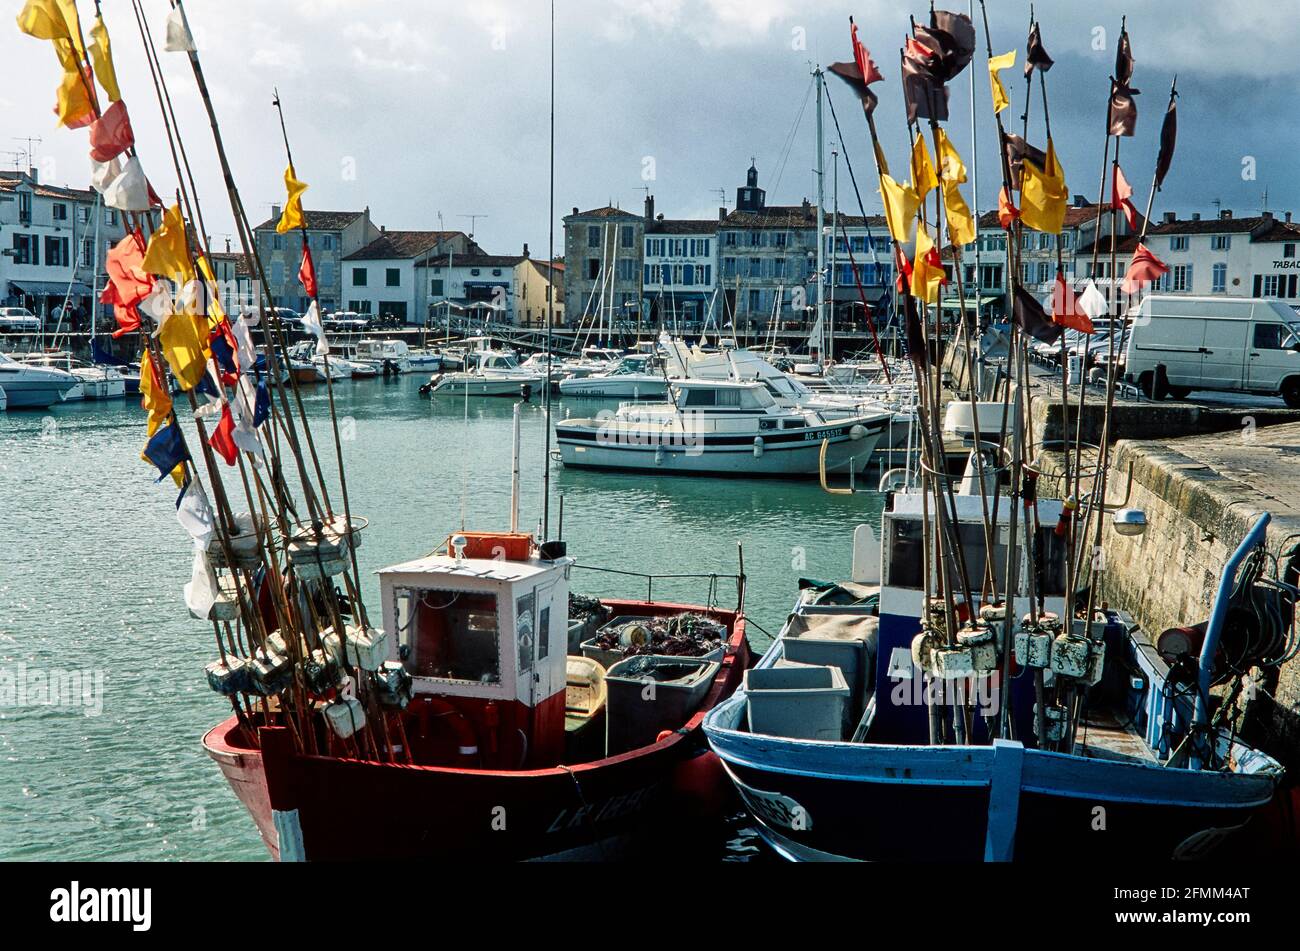 The town of Saint-Martin-de-Re on the Ile de Re, on the west coast of France, with its harbor. 01.05.2005 - Christoph Keller Stock Photo